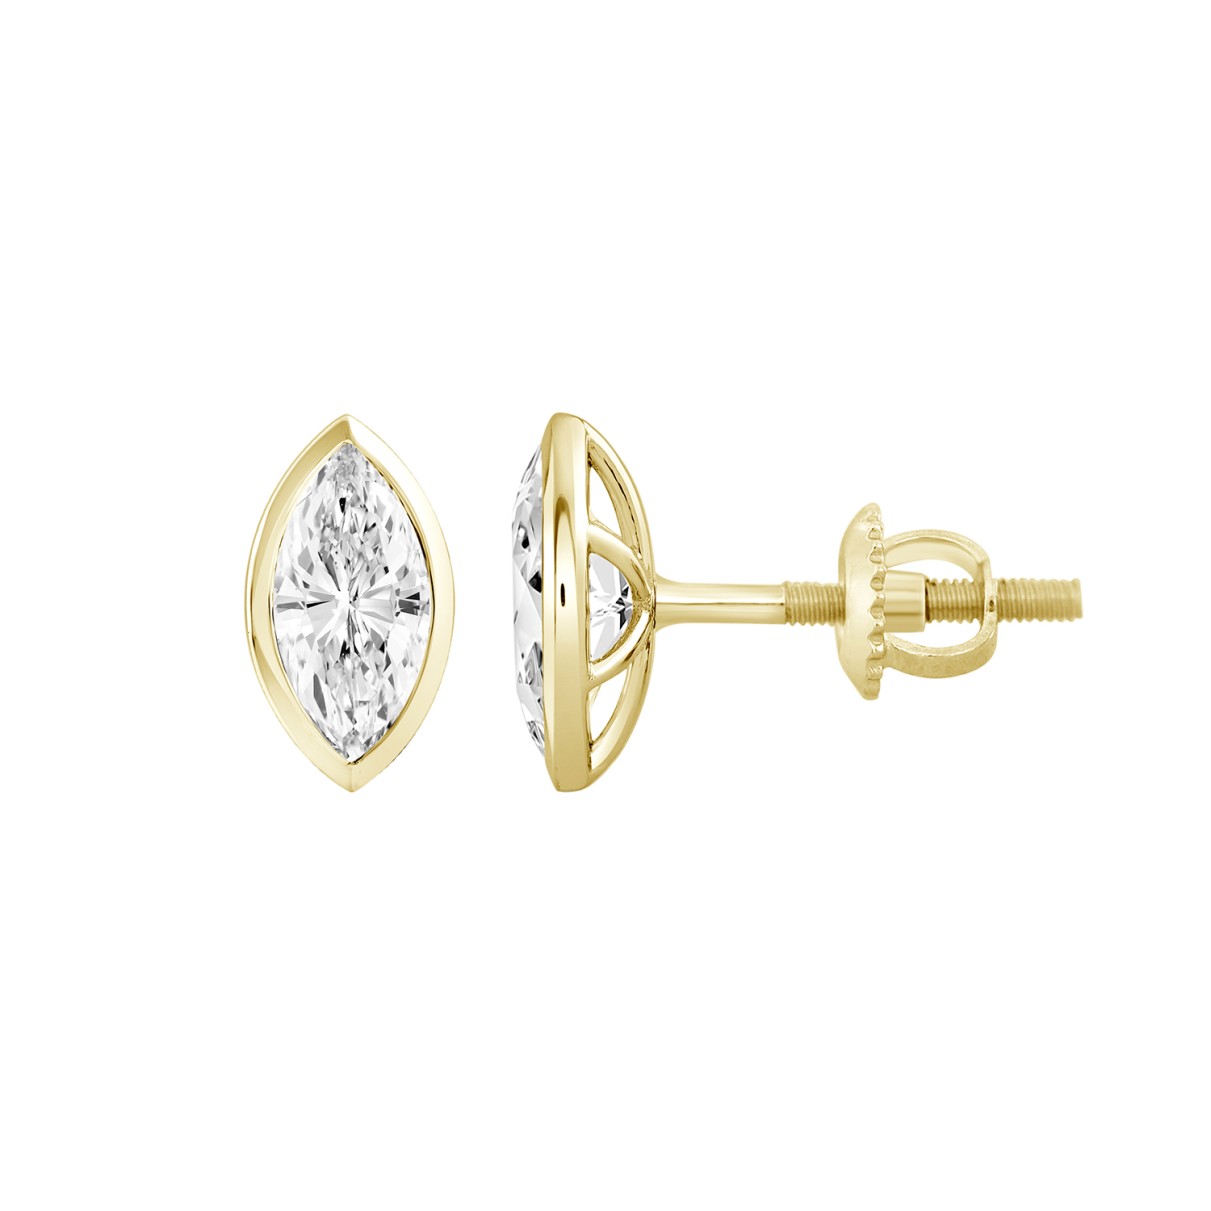 LADIES SOLITAIRE EARRINGS 1CT MARQUISE DIAMOND 14K YELLOW GOLD